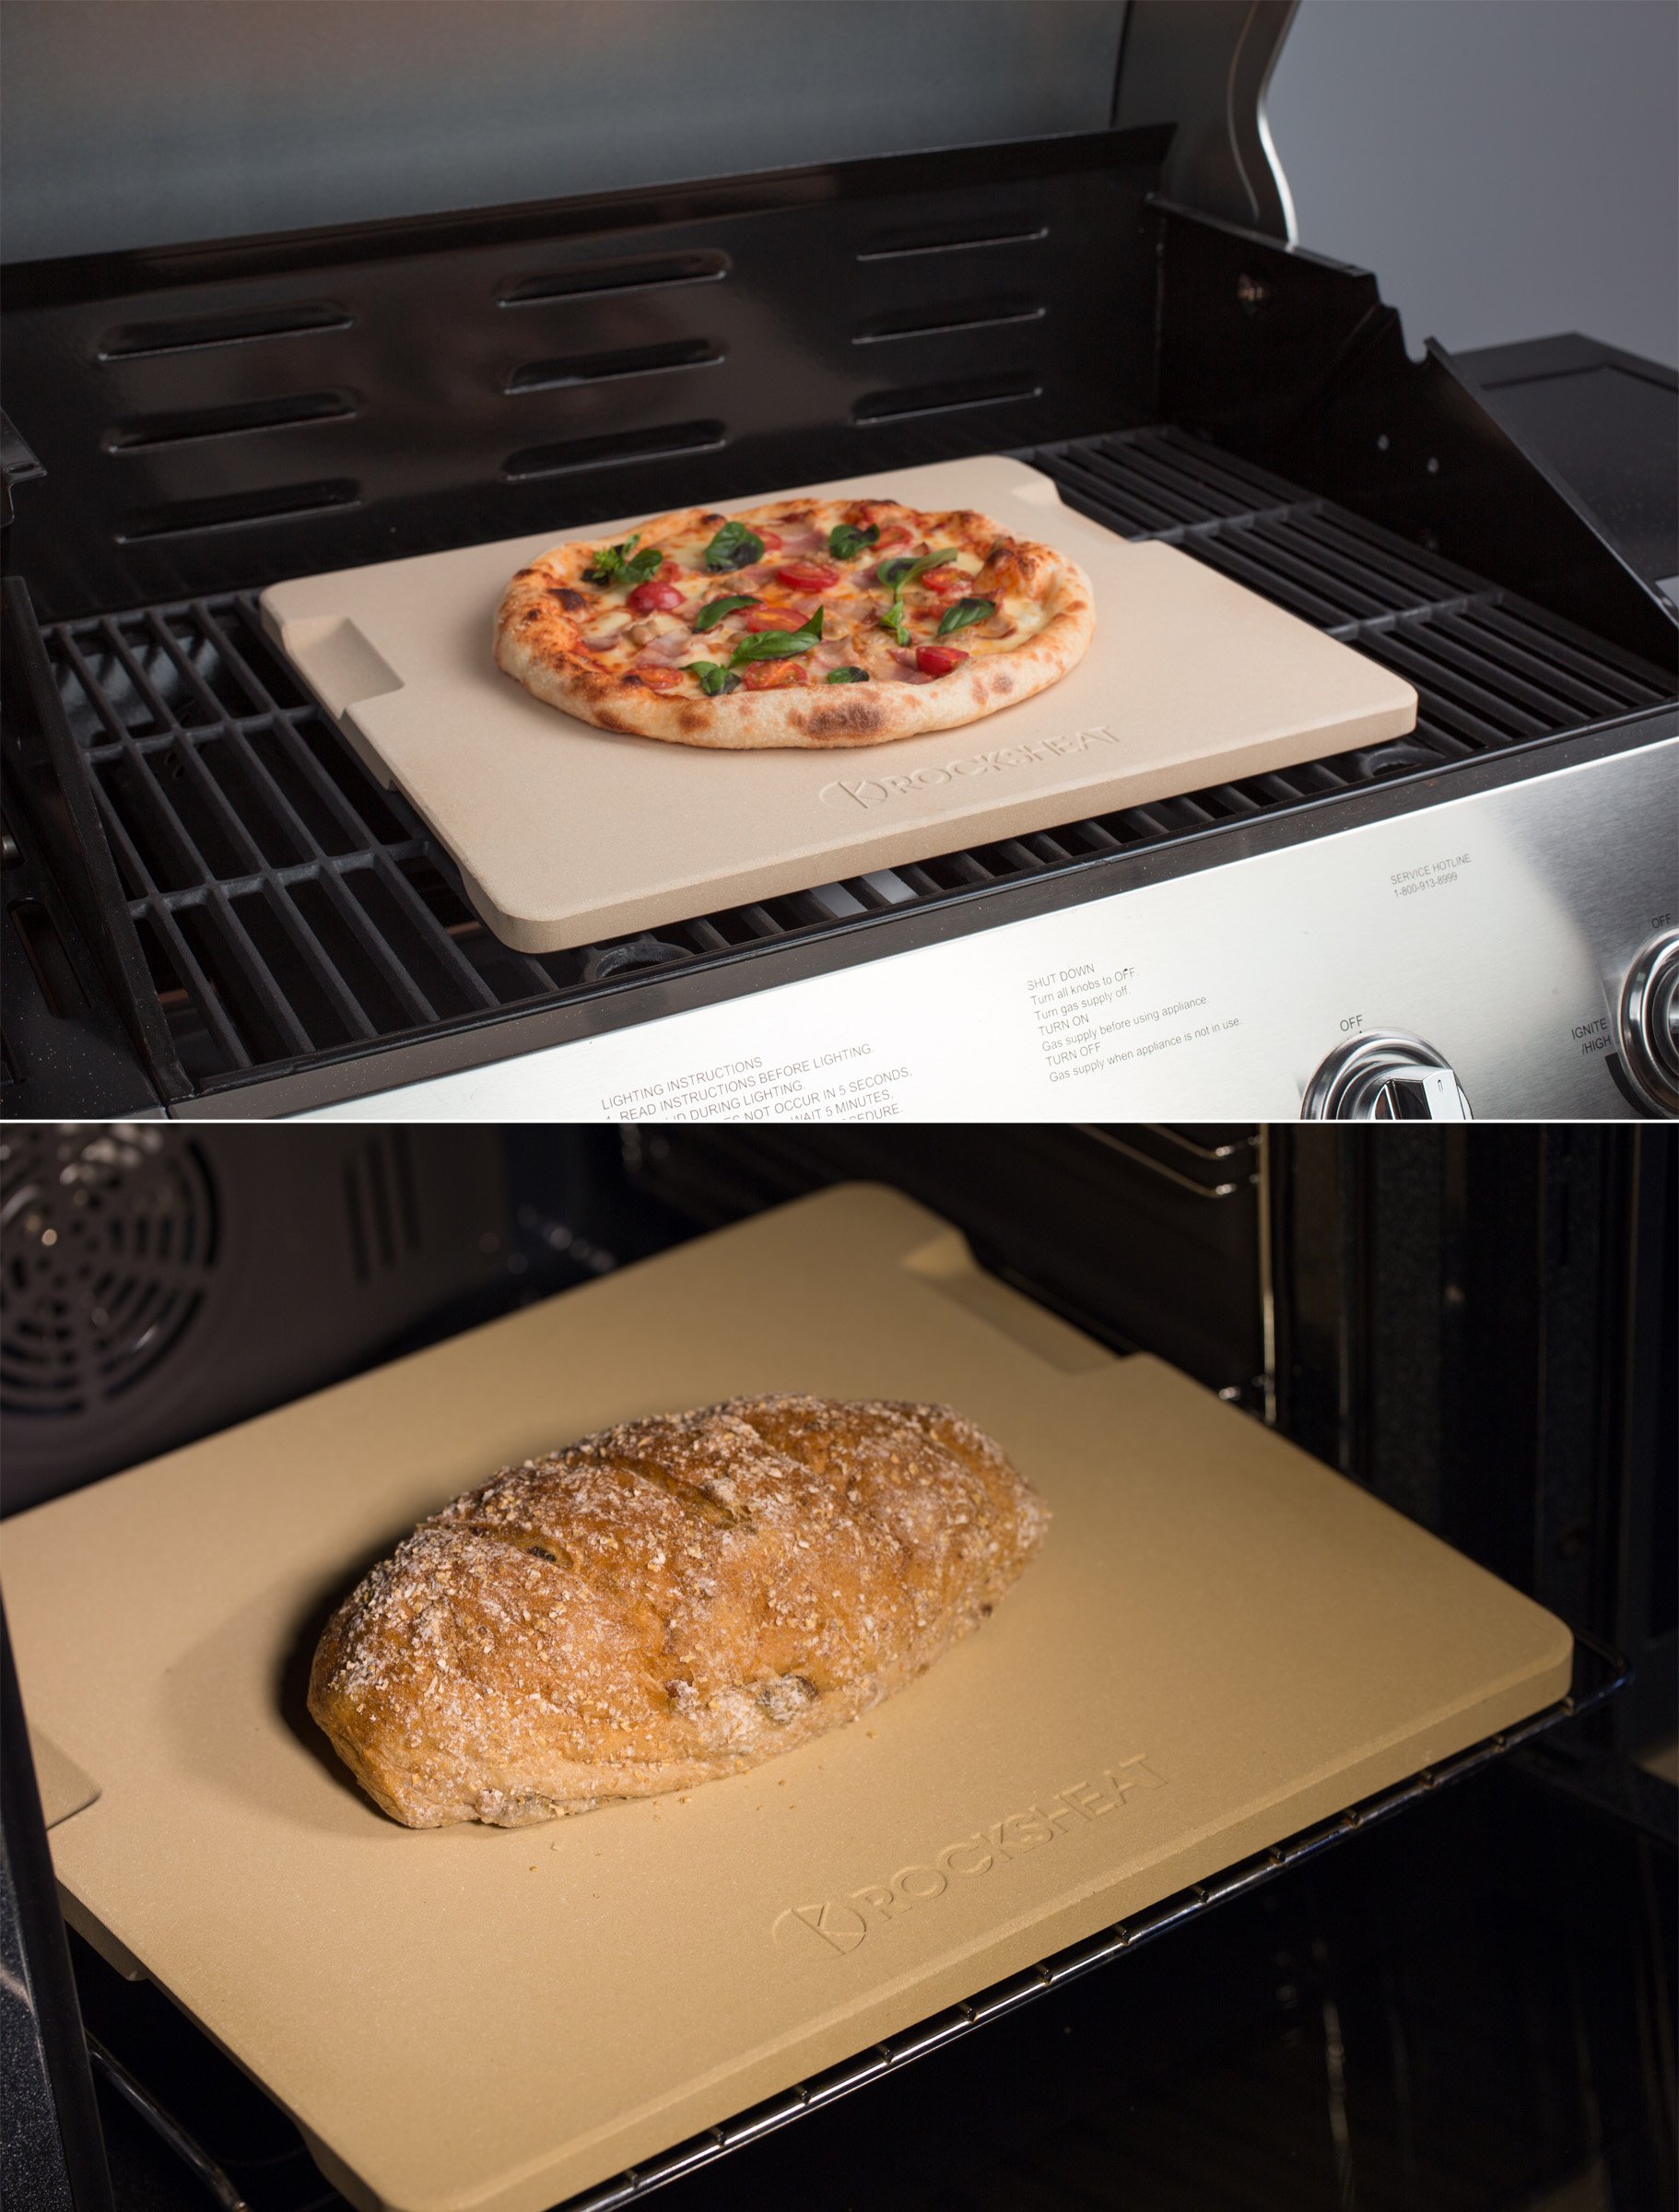 Pizza Stone Baking & Grilling Stone, Perfect for Oven, BBQ and Grill. Innovative Double - faced Built - in 4 Handles Design (14